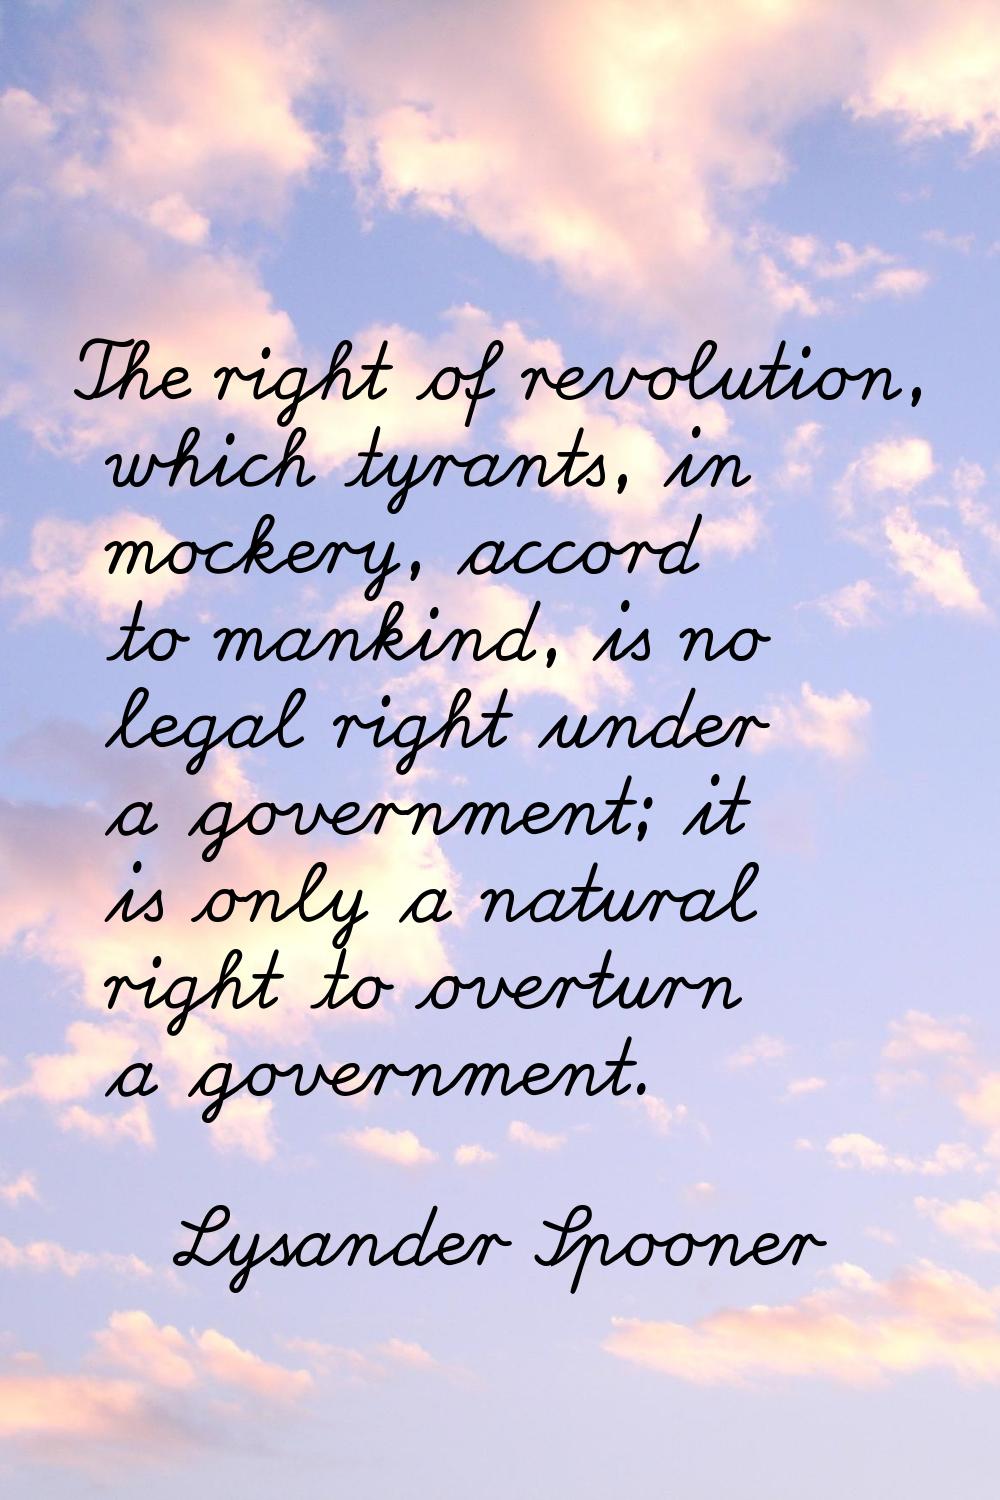 The right of revolution, which tyrants, in mockery, accord to mankind, is no legal right under a go